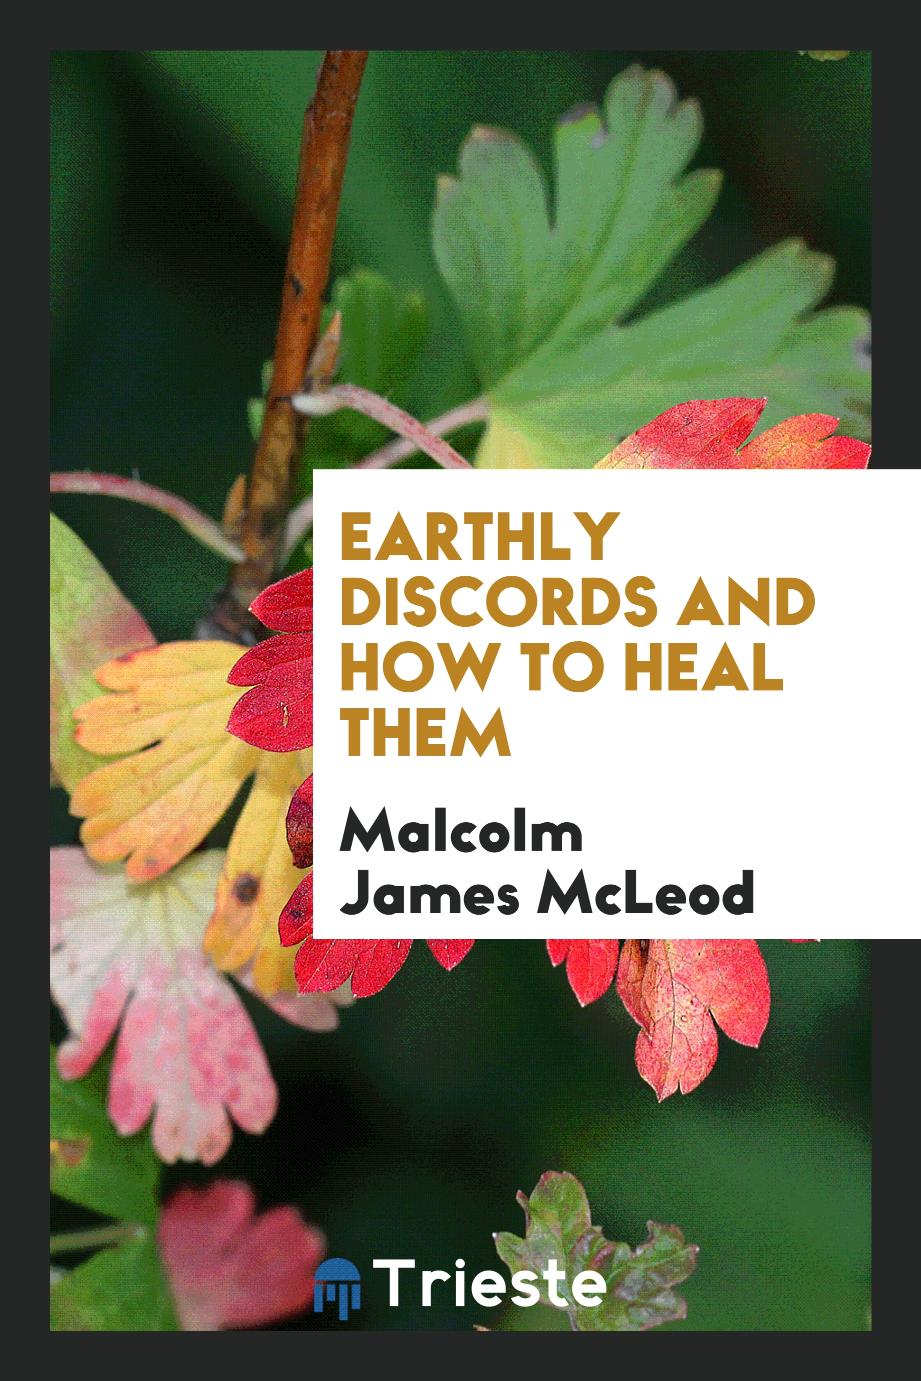 Earthly discords and how to heal them